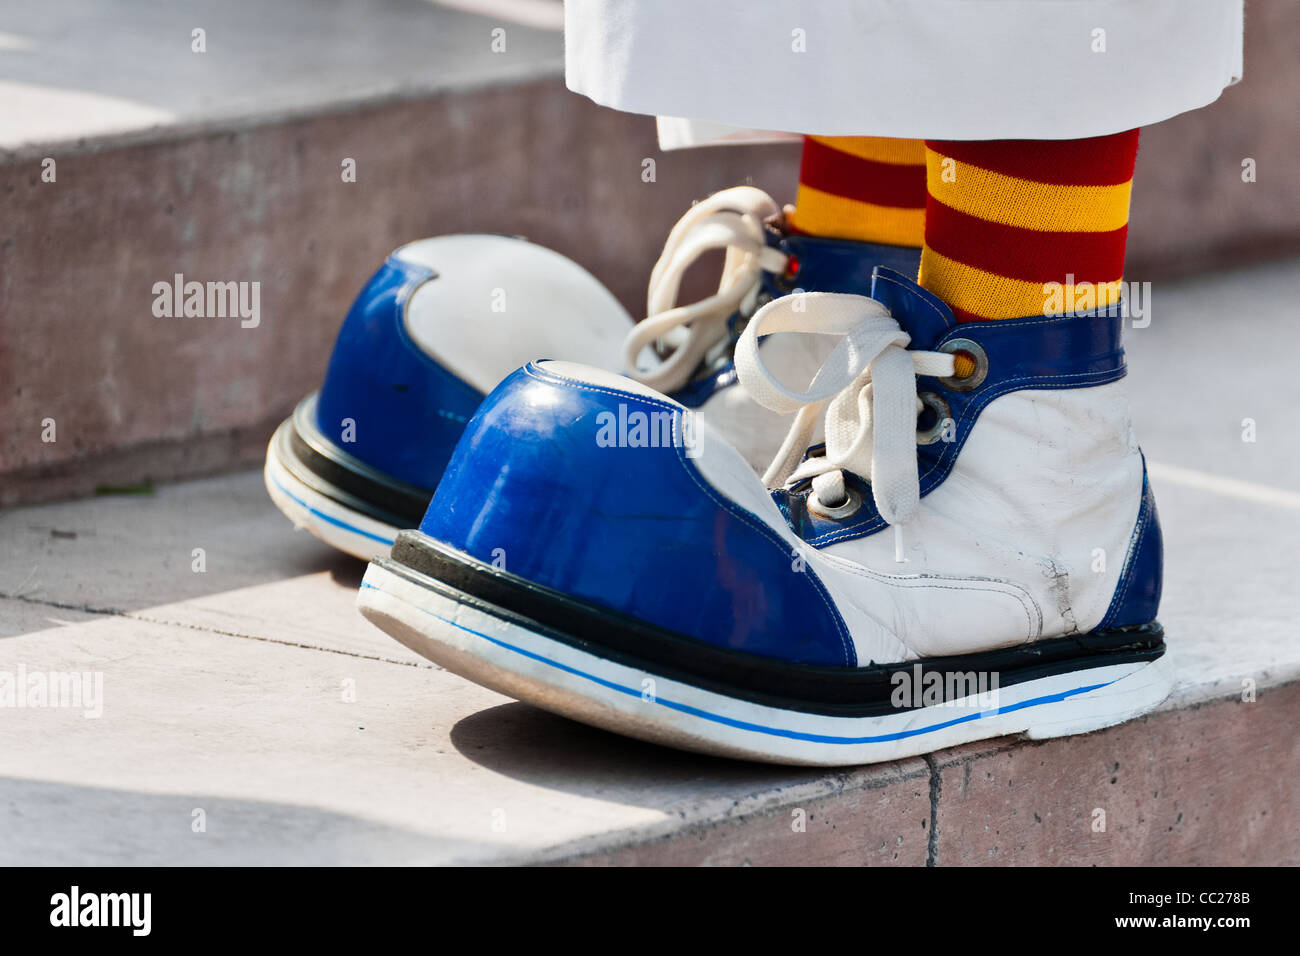 A clown wears oversized blue and white shoes during the Clown Congress in San Salvador, El Salvador. Stock Photo